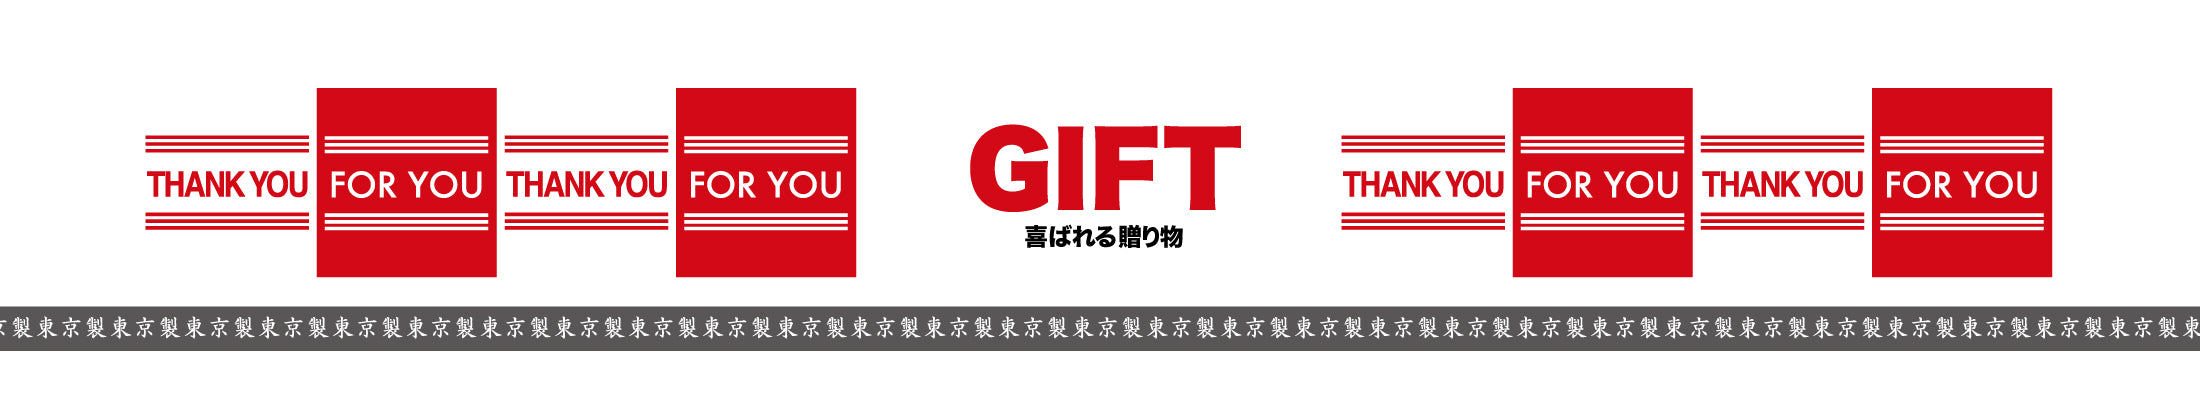 DENISのGIFT ギフト プレゼント 贈り物